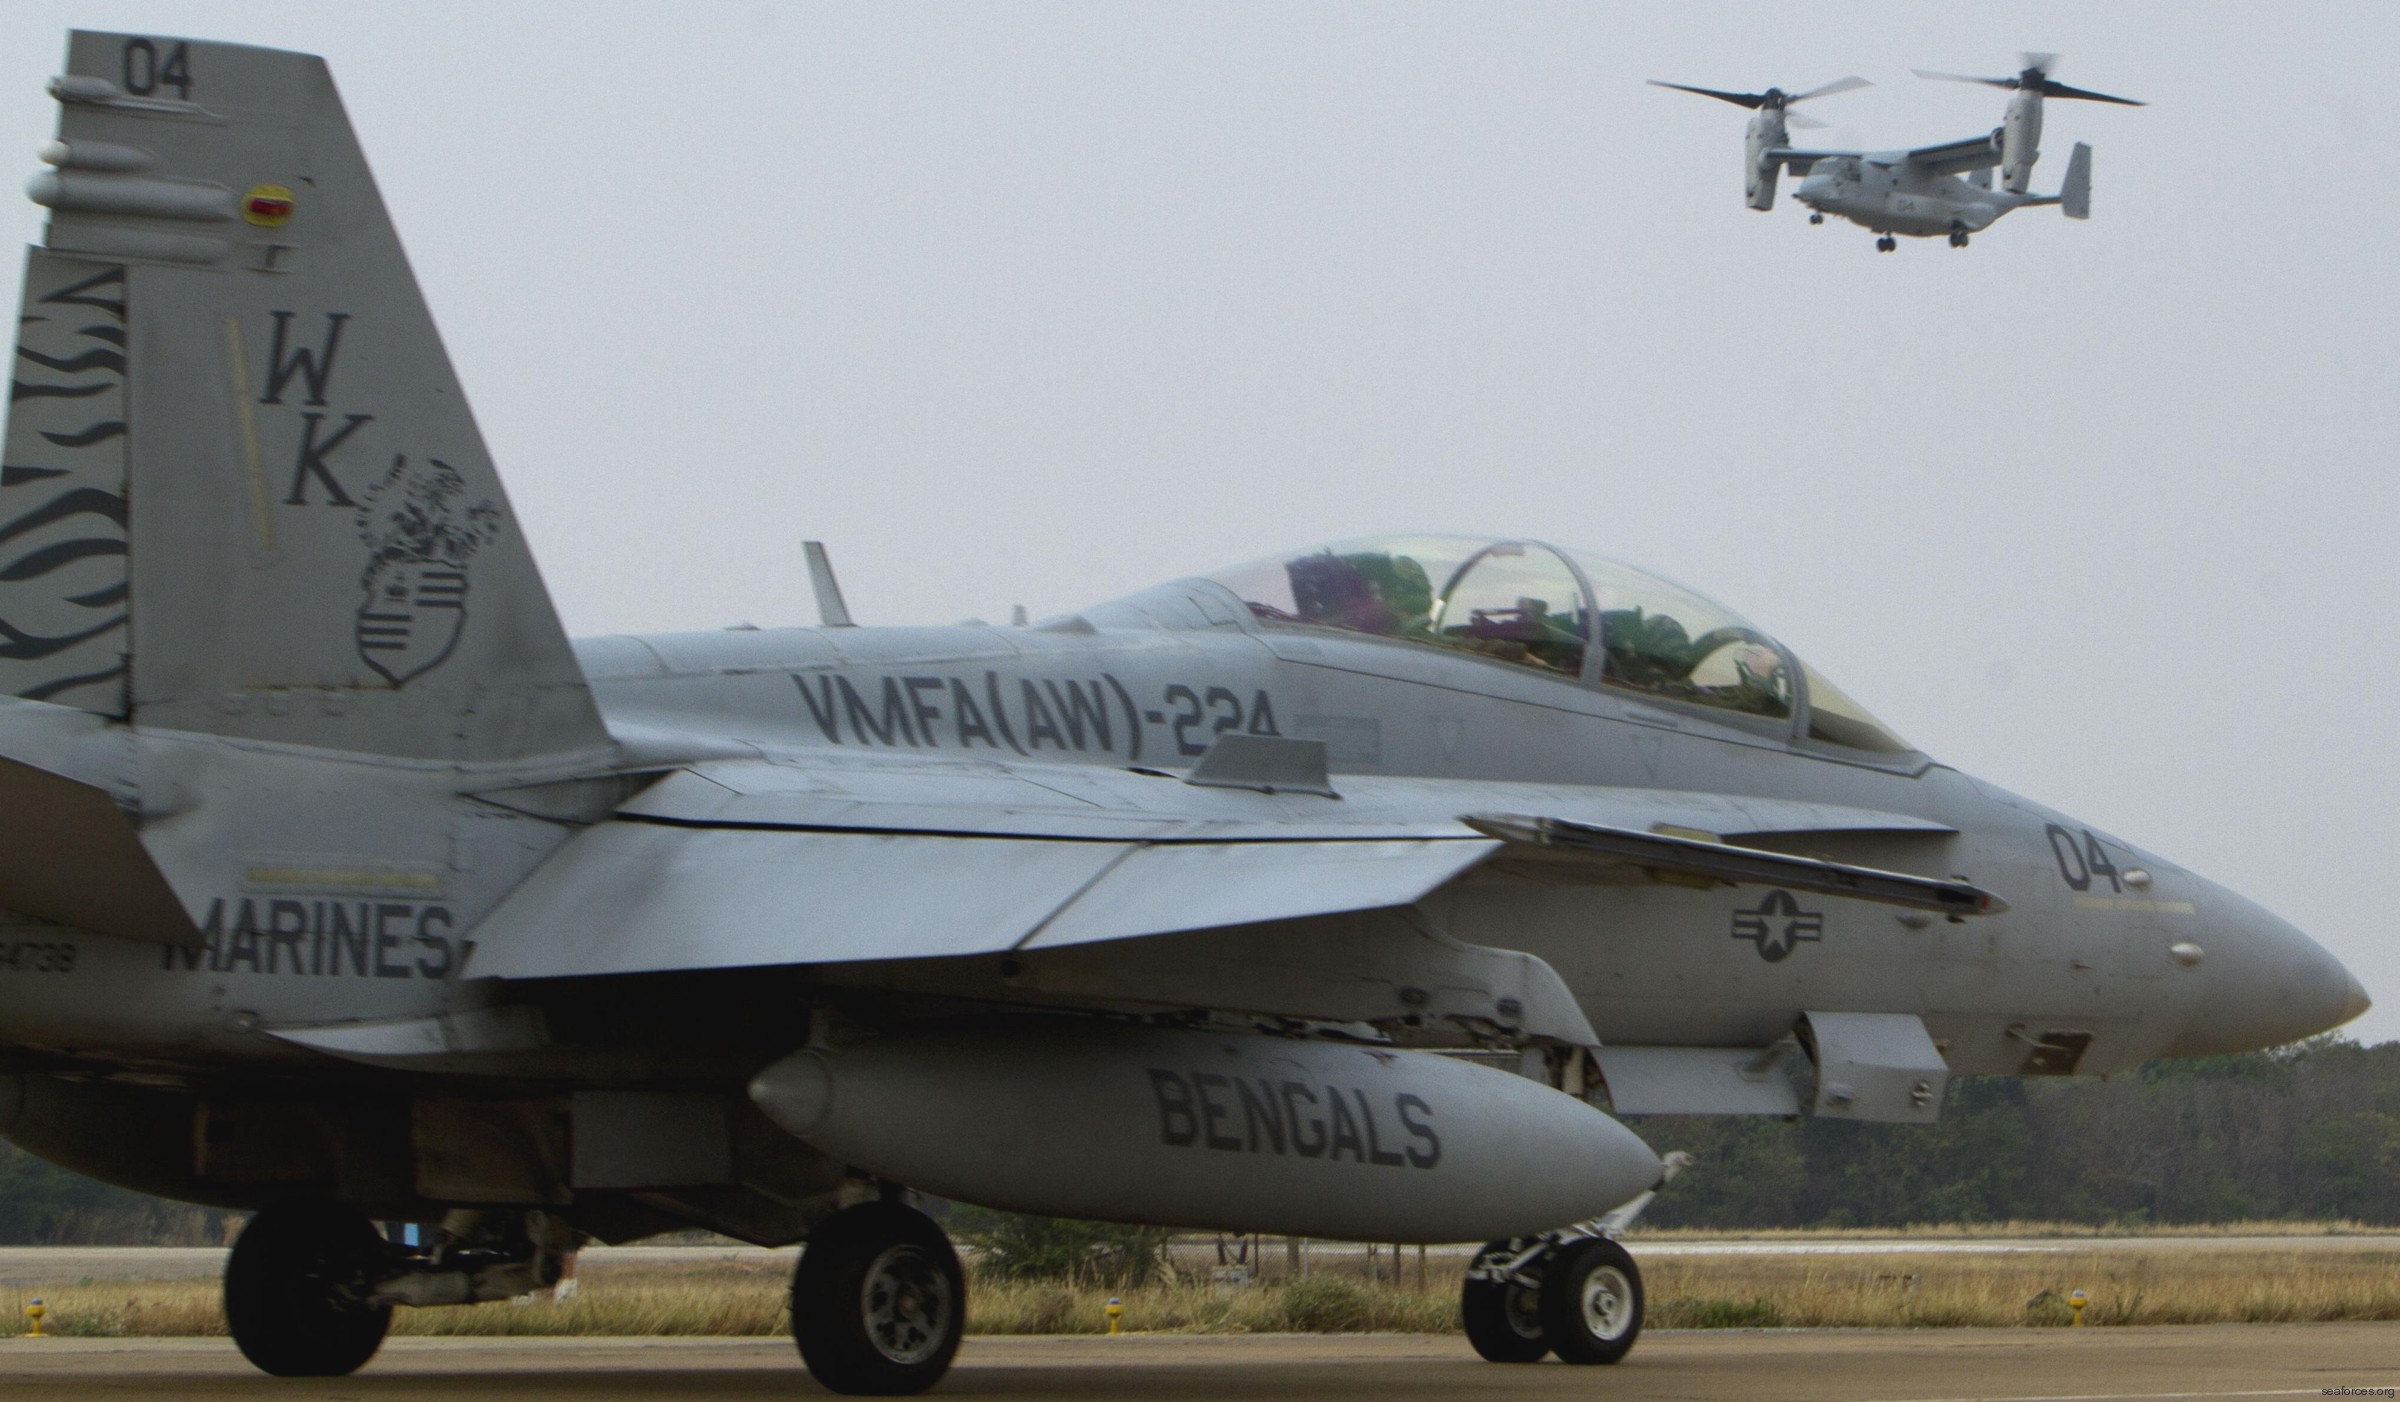 vmfa(aw)-224 bengals marine fighter attack squadron usmc f/a-18d hornet 13